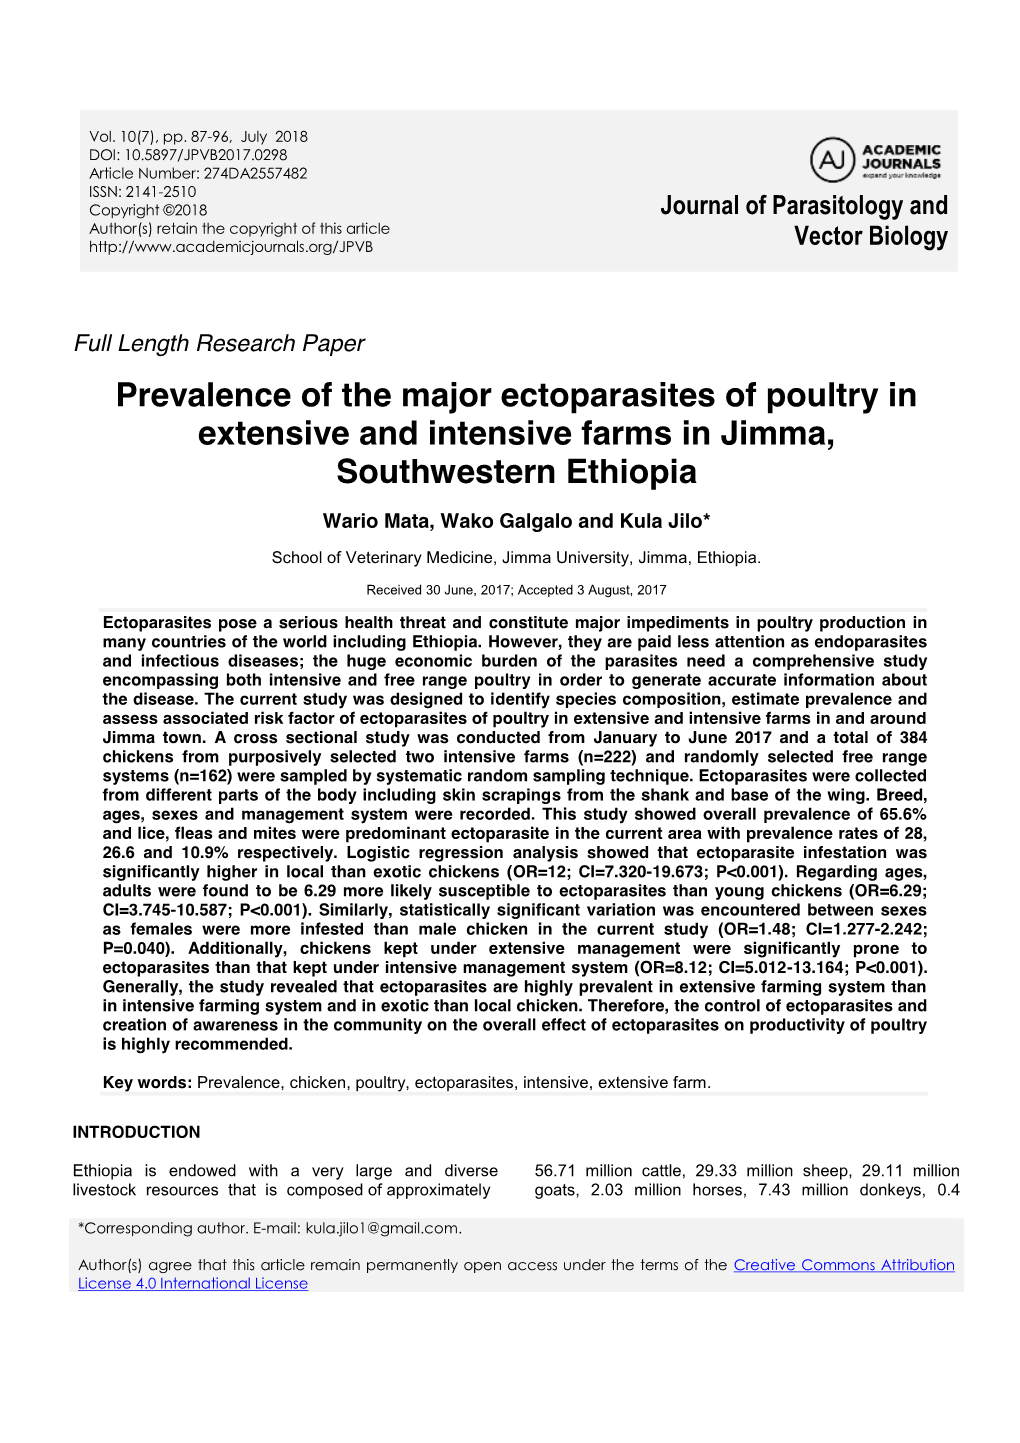 Prevalence of the Major Ectoparasites of Poultry in Extensive and Intensive Farms in Jimma, Southwestern Ethiopia